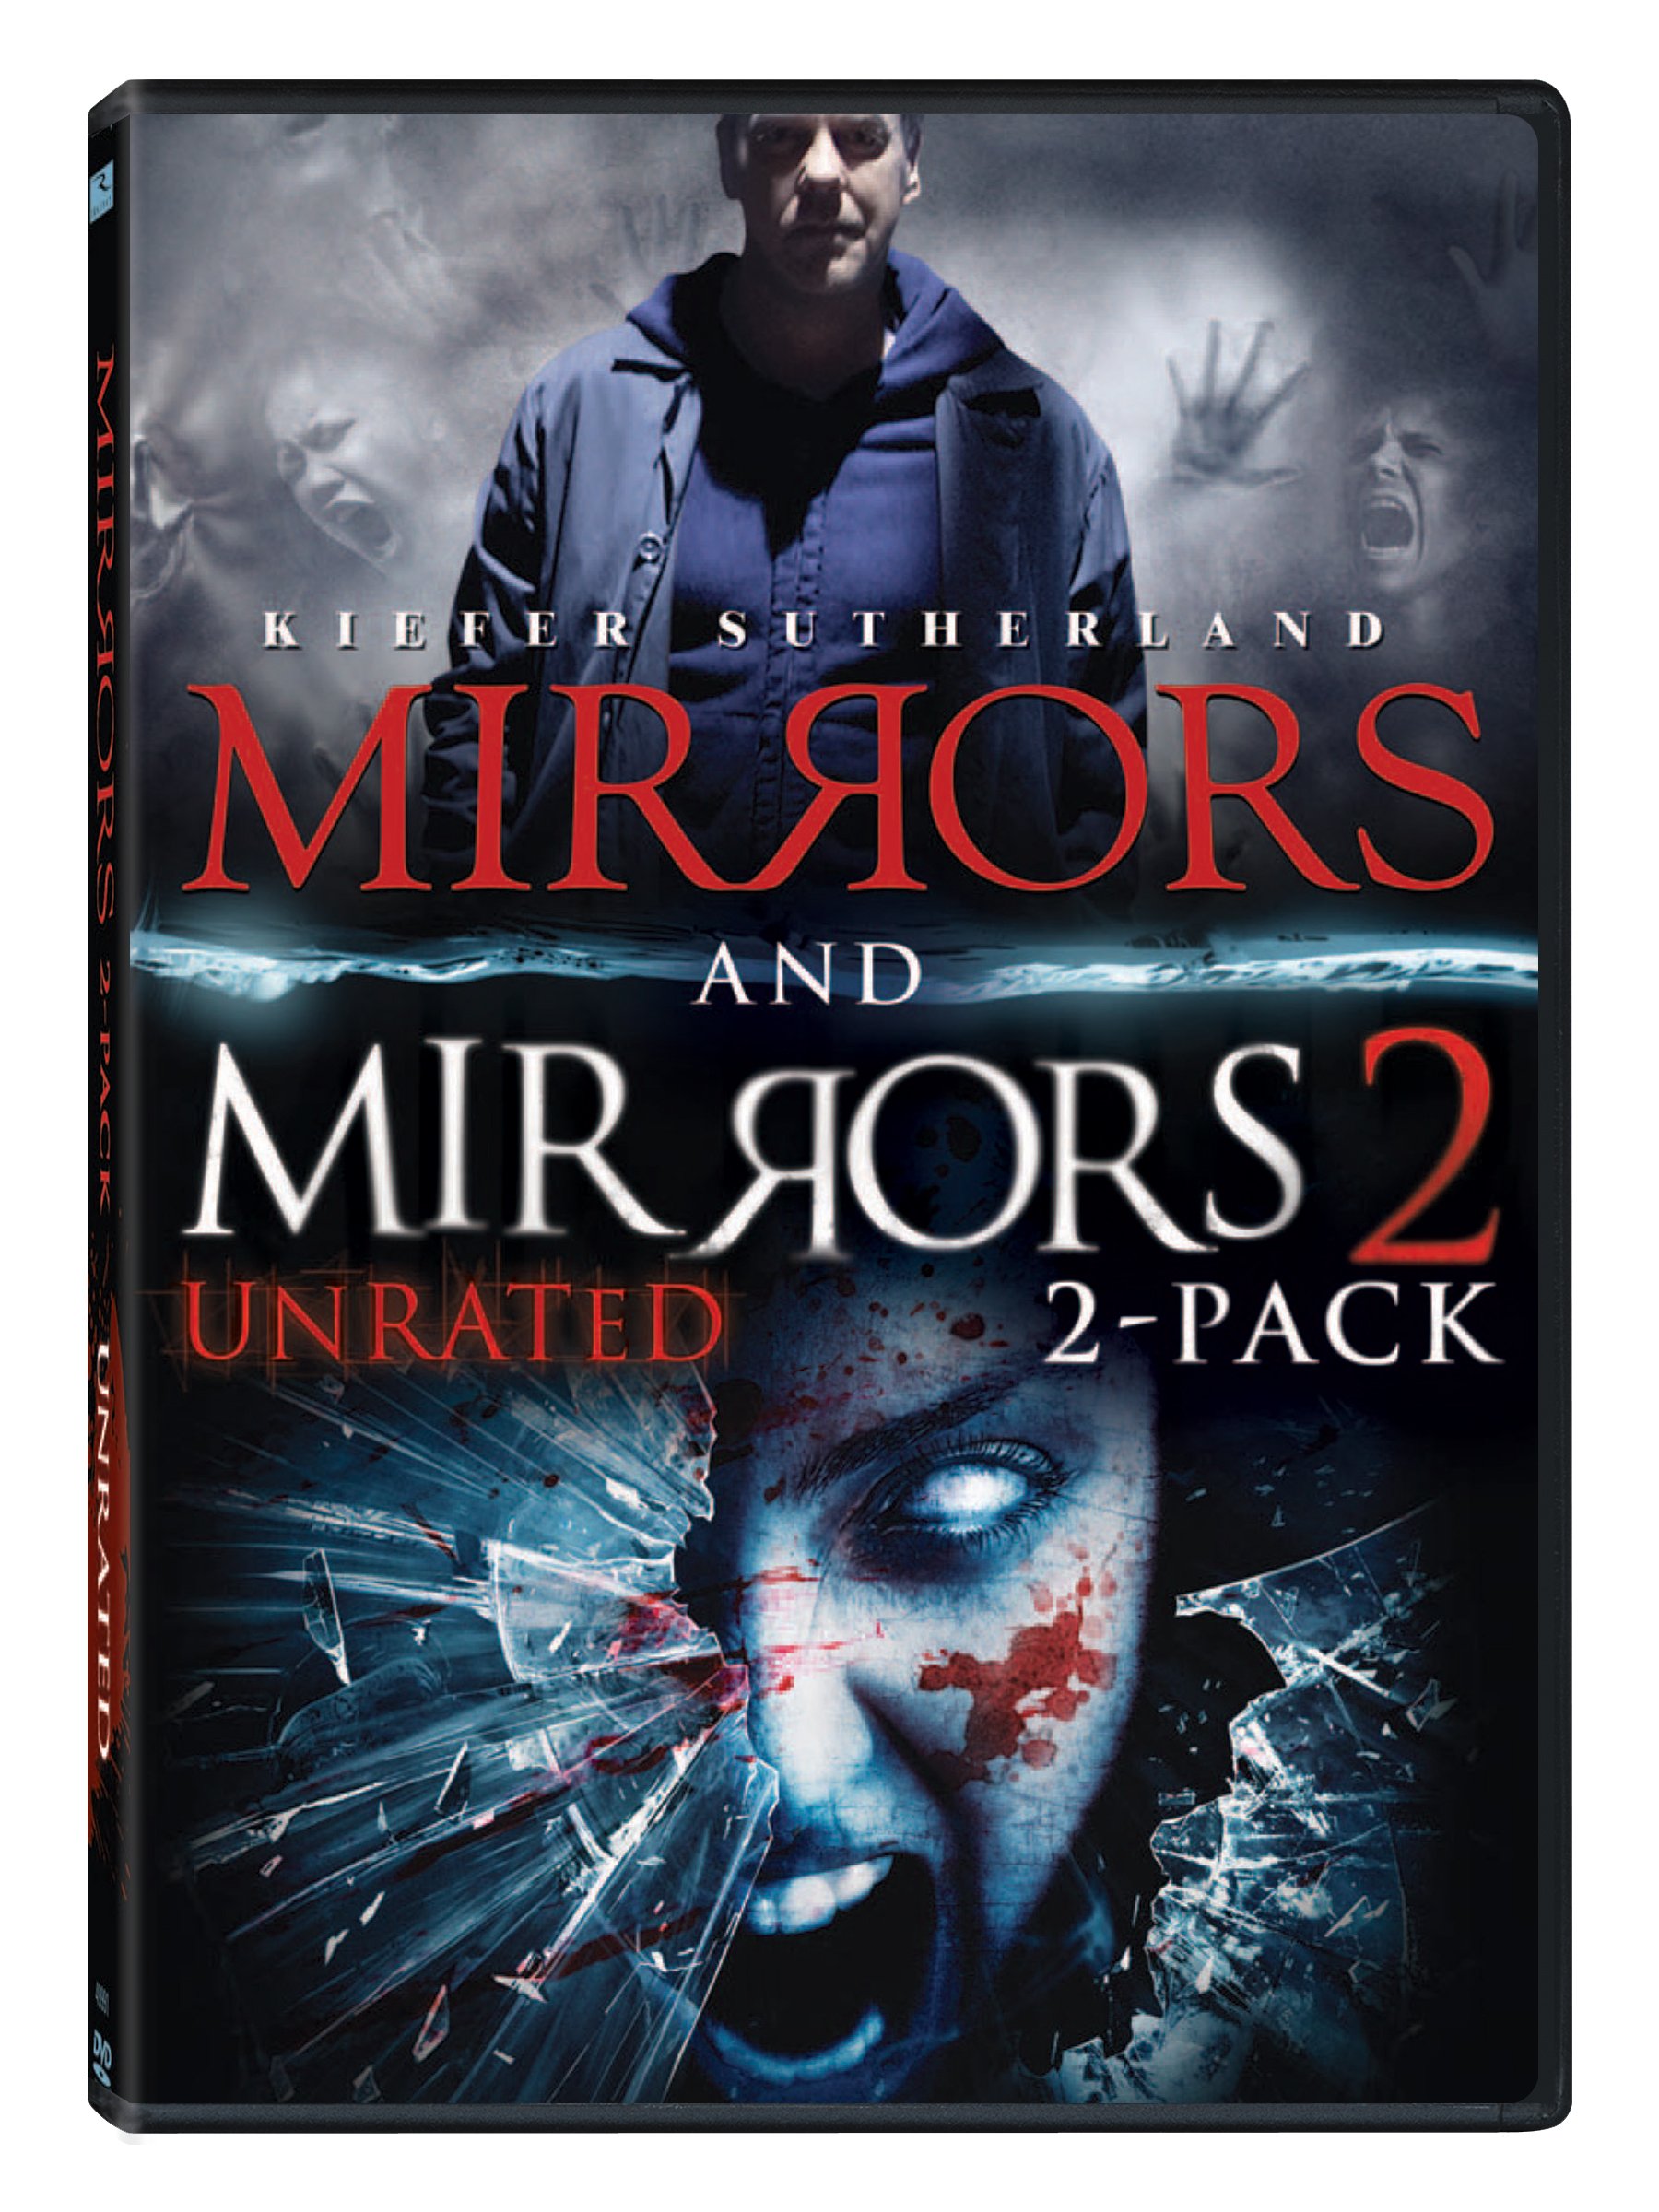 2-movies-collection-mirrors-mirrors-2-unrated-movie-purchase-or-w